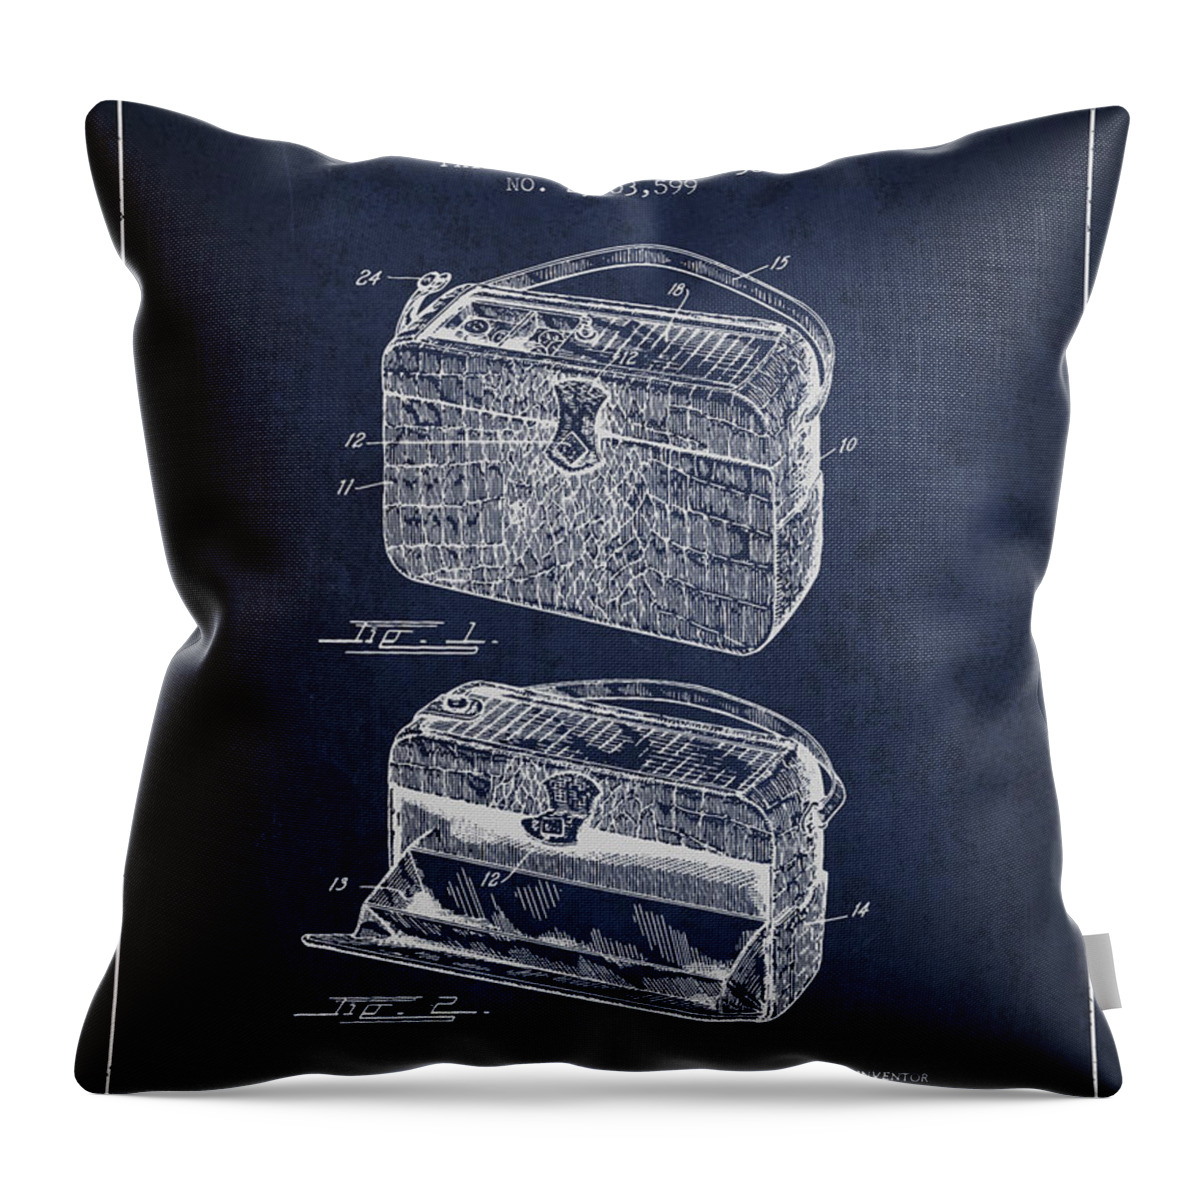 Purse Throw Pillow featuring the digital art Handbag patent from 1936 - Navy Blue by Aged Pixel